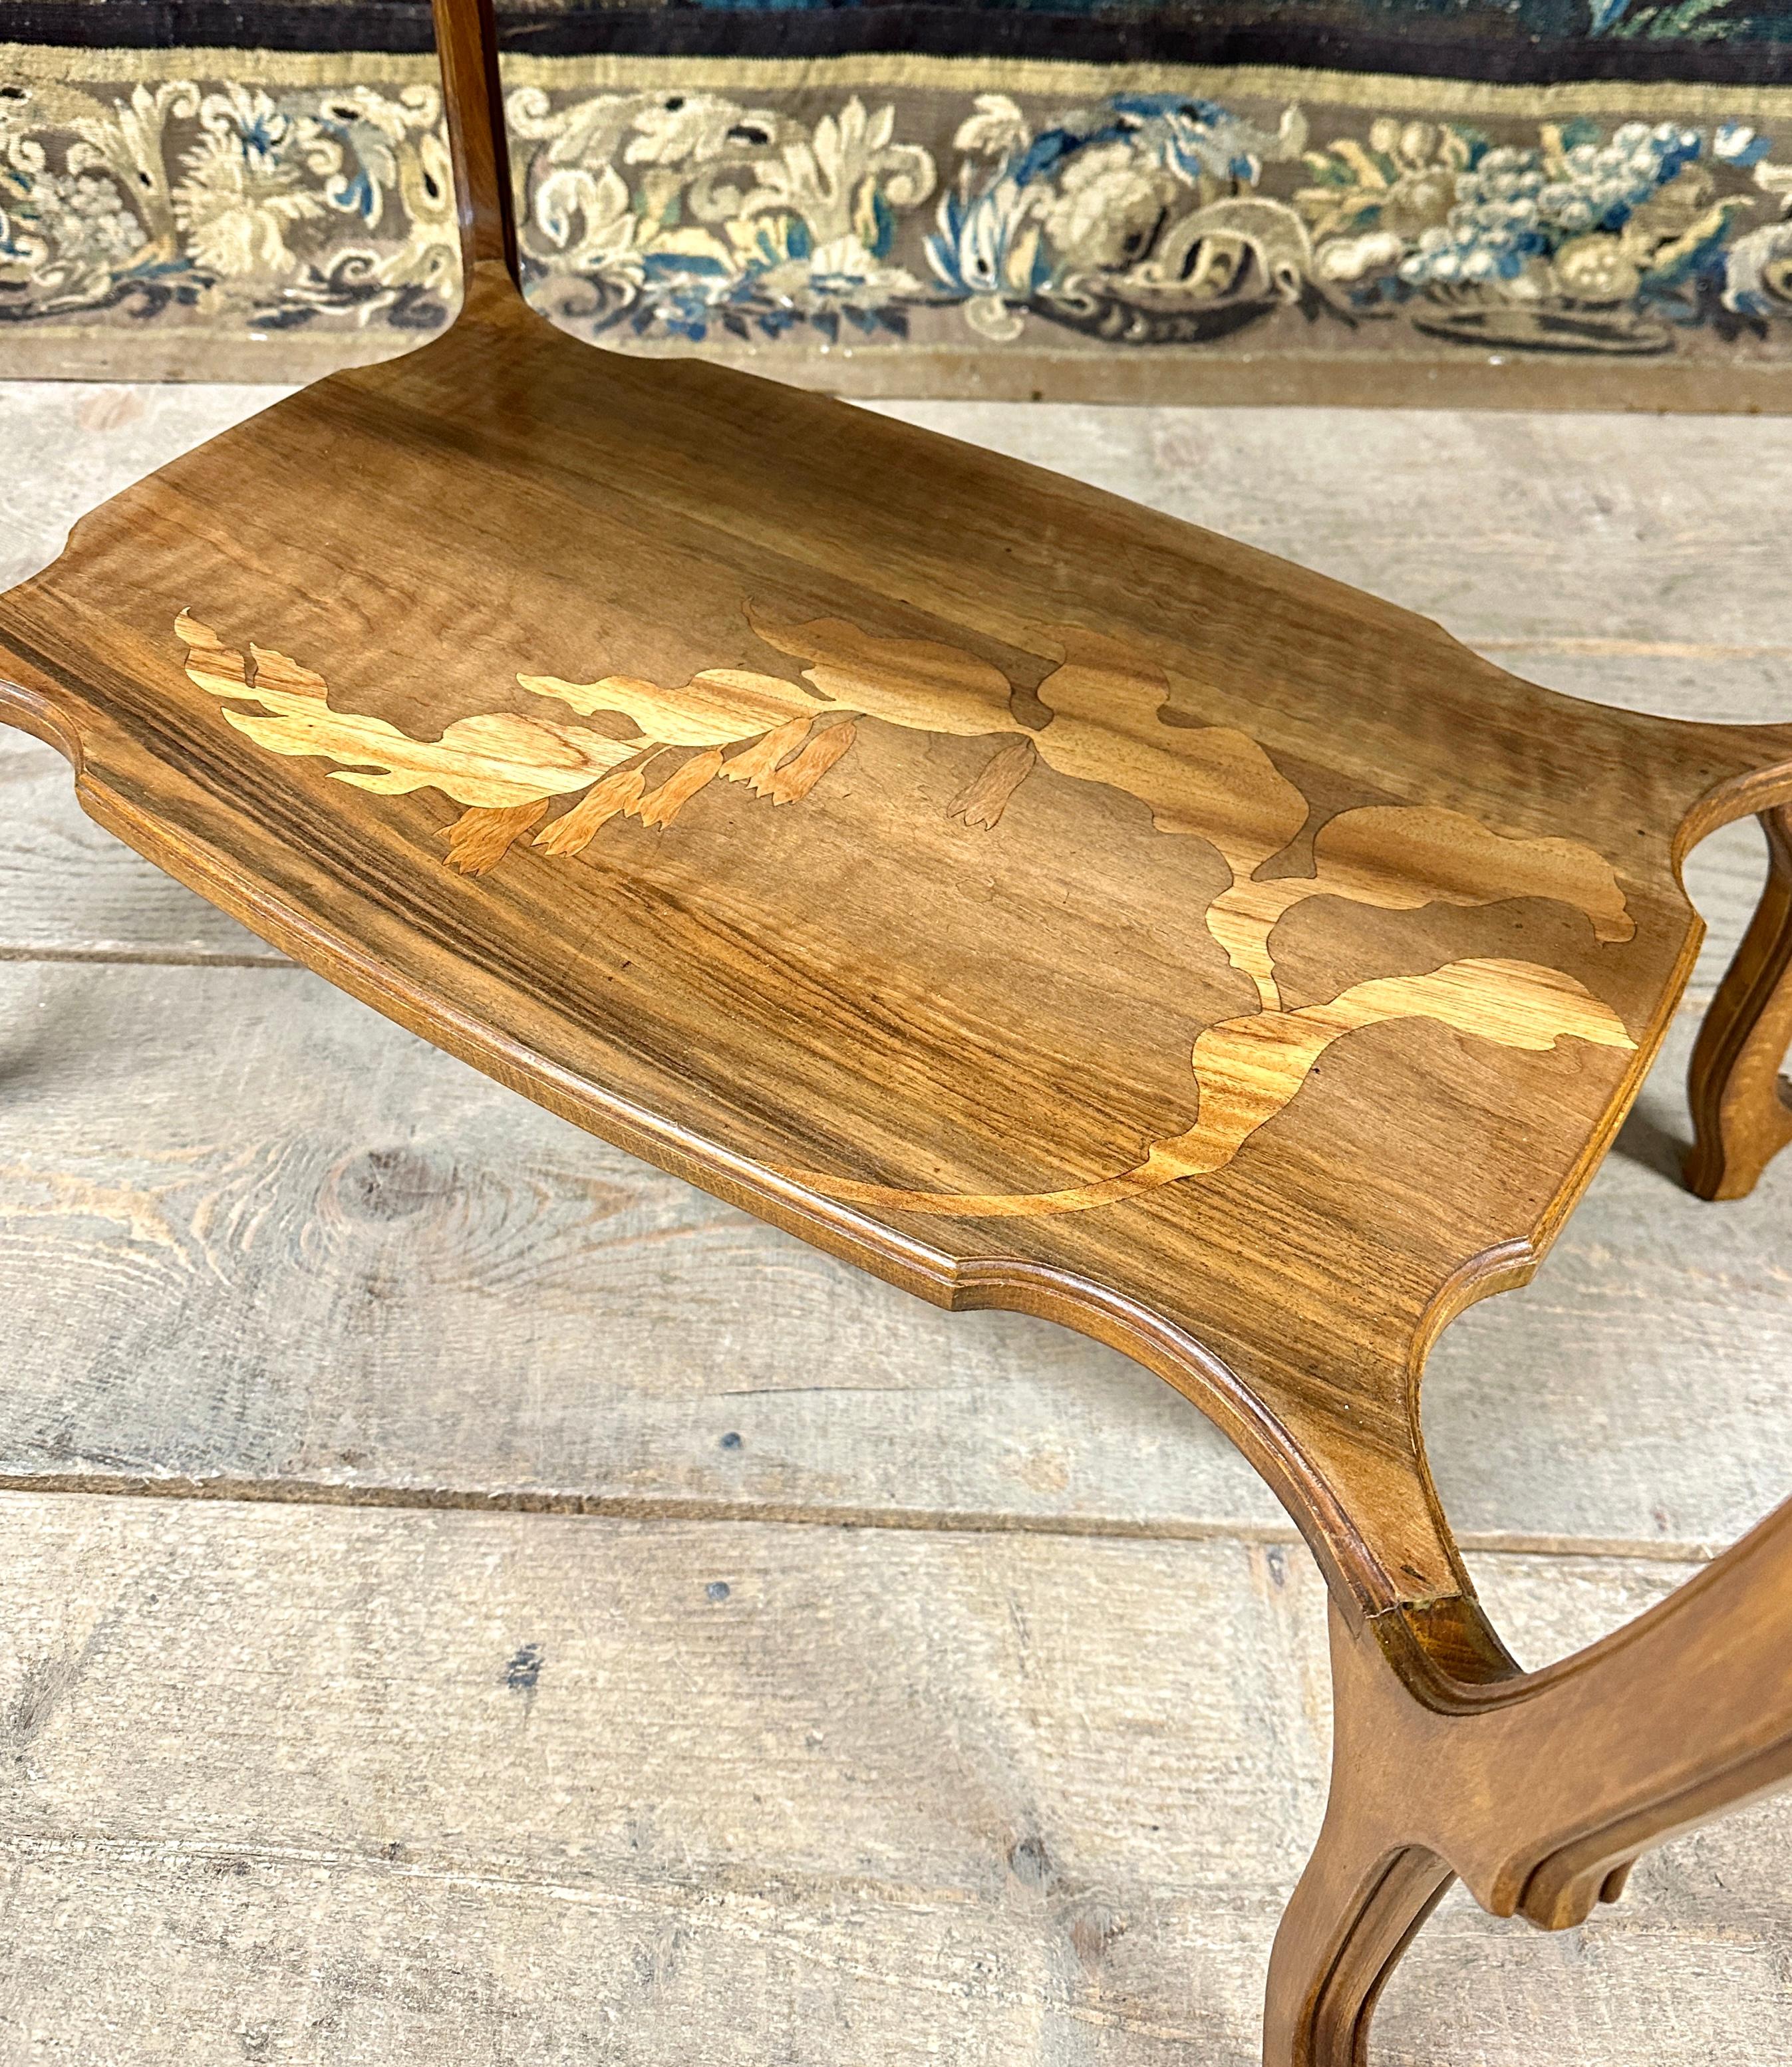 Fruitwood Emile Gallé - Tea Table With Three Trays In Marquetry. Art Nouveau Period, 1900s For Sale